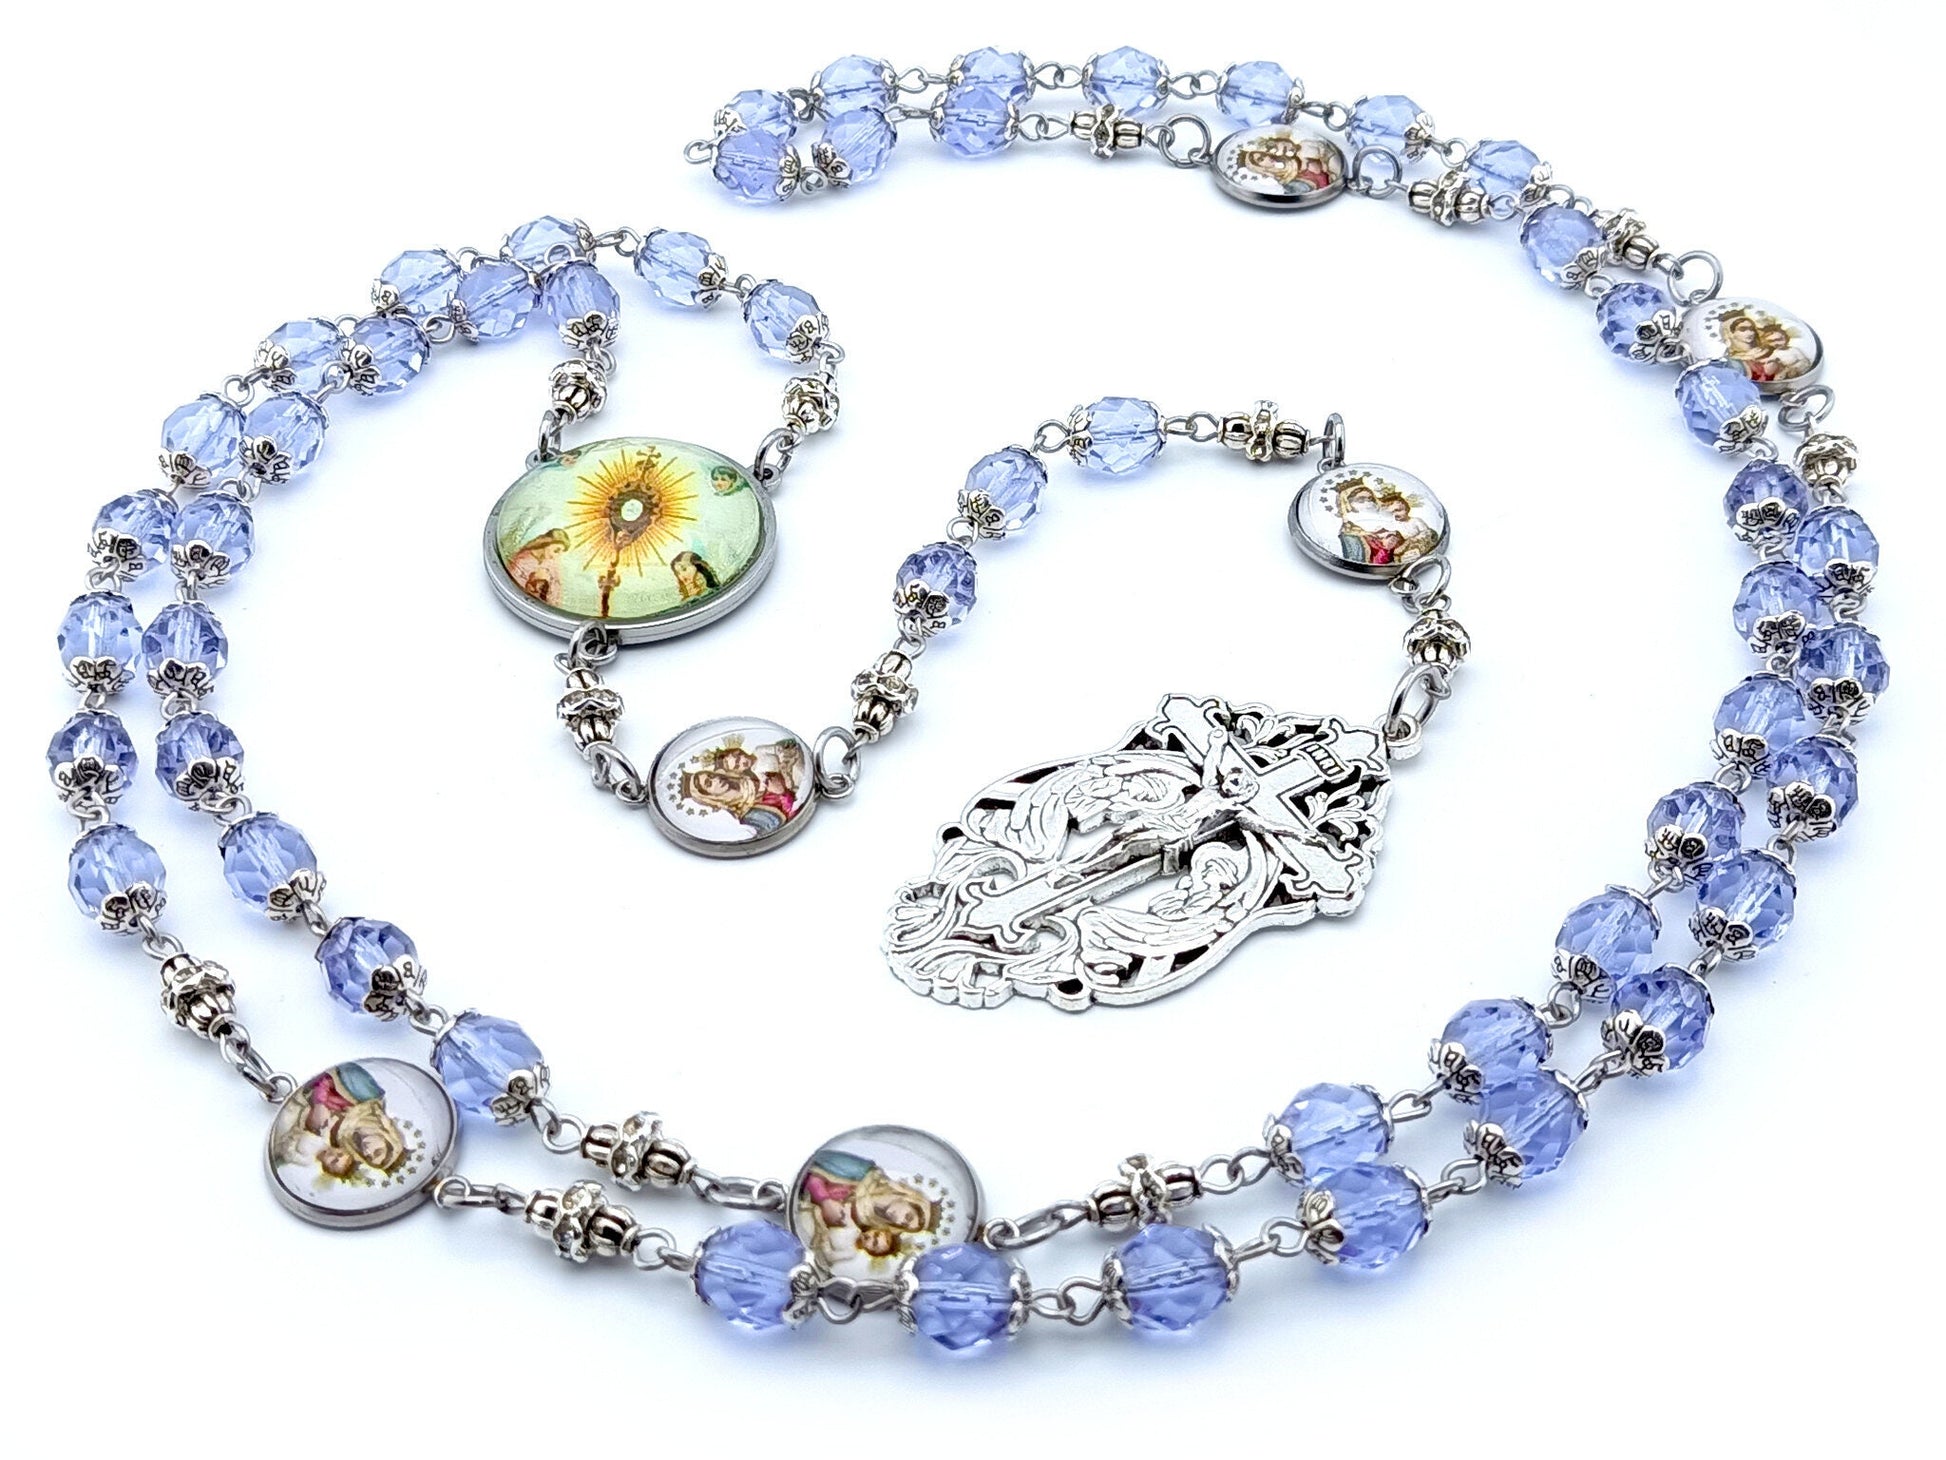 Our Lady of Mount Carmel unique rosary beads with lilac glass faceted beads, stainless steel picture centre medal and crucifix.